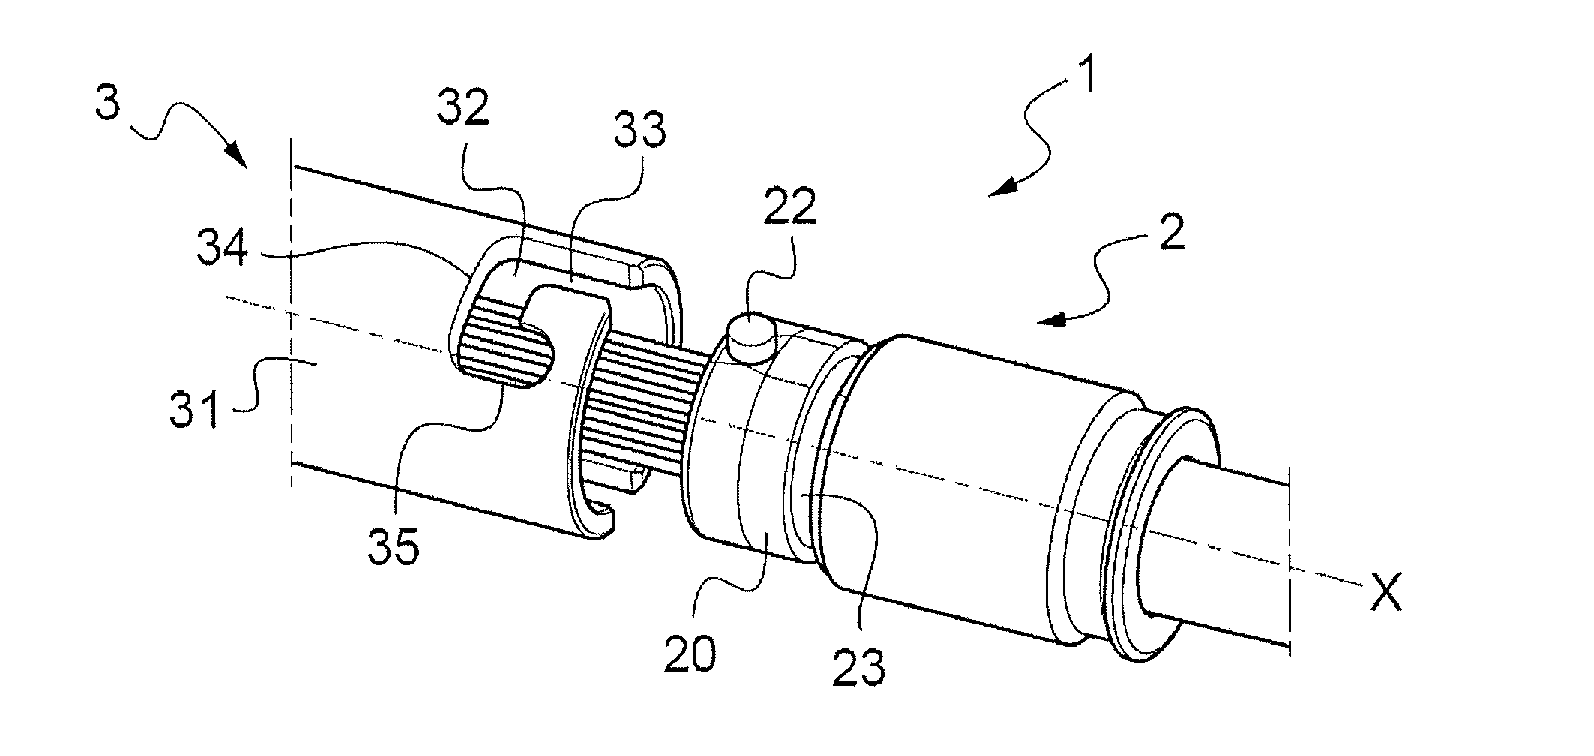 Connection assembly with bayonet locking of the connection elements